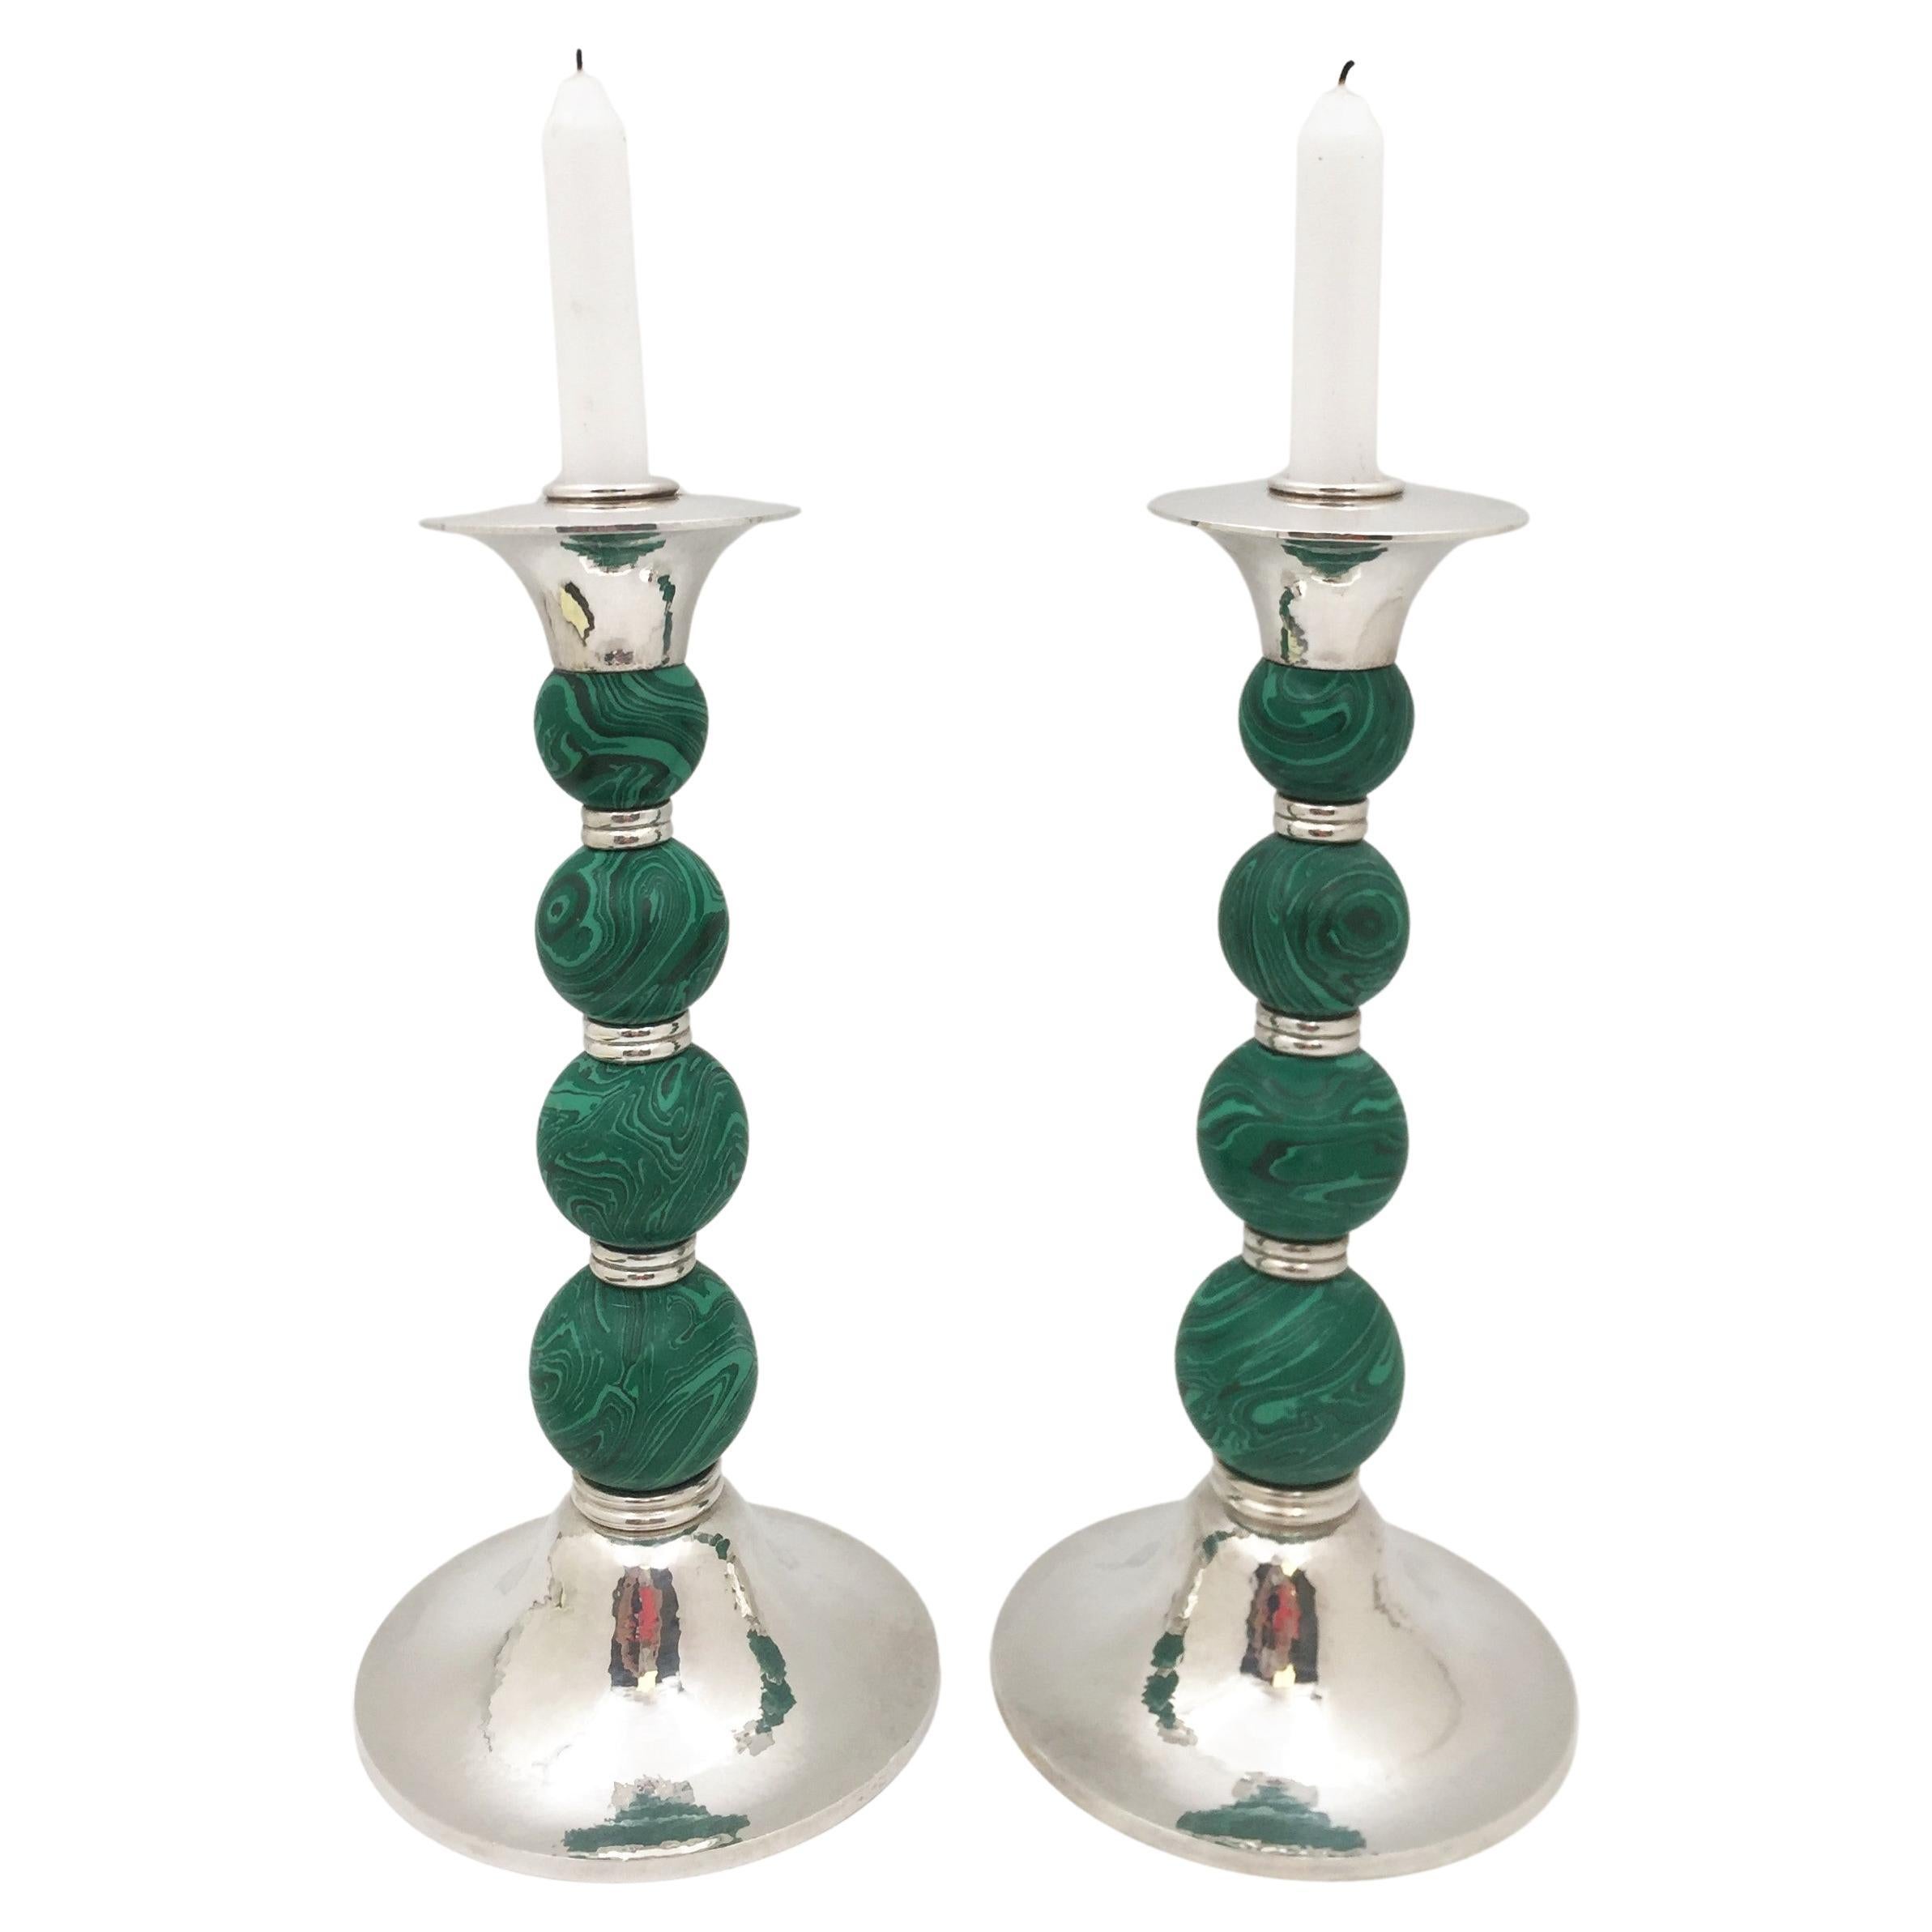 Crawford Sterling Silver and Malachite Candlesticks in Mid-Century Modern Style